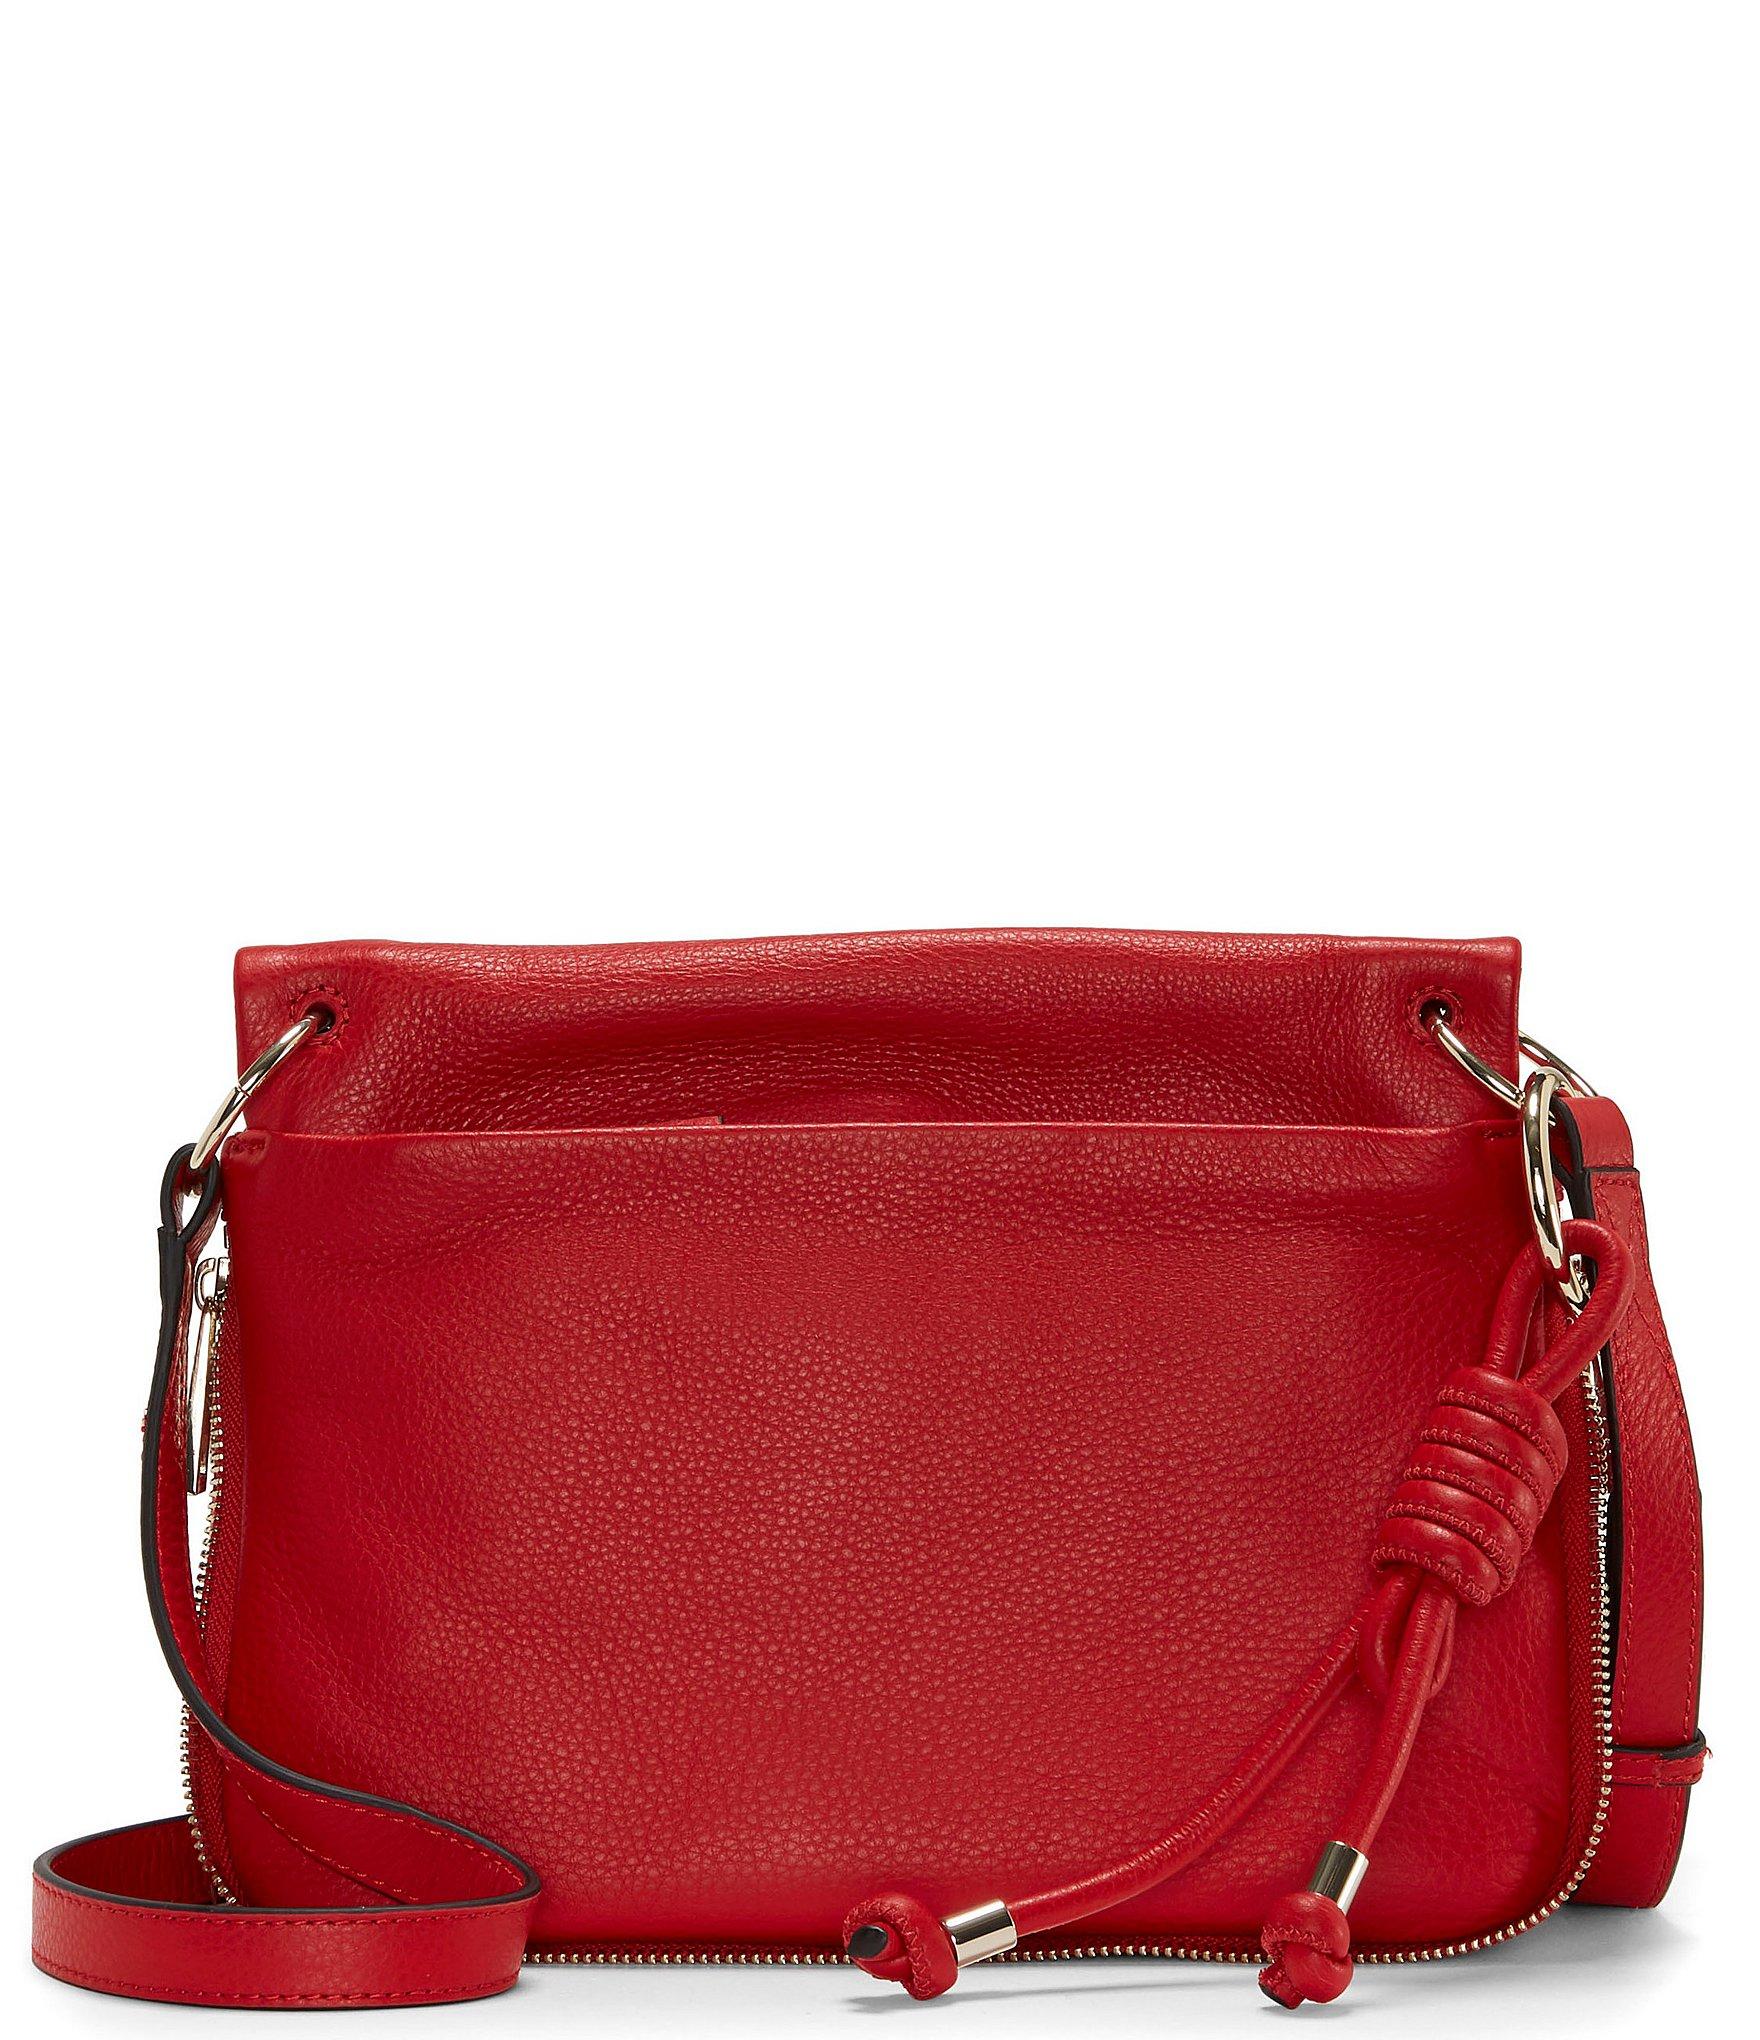 Vince Camuto Lake Flap Small Leather Crossbody Bag in Red - Lyst